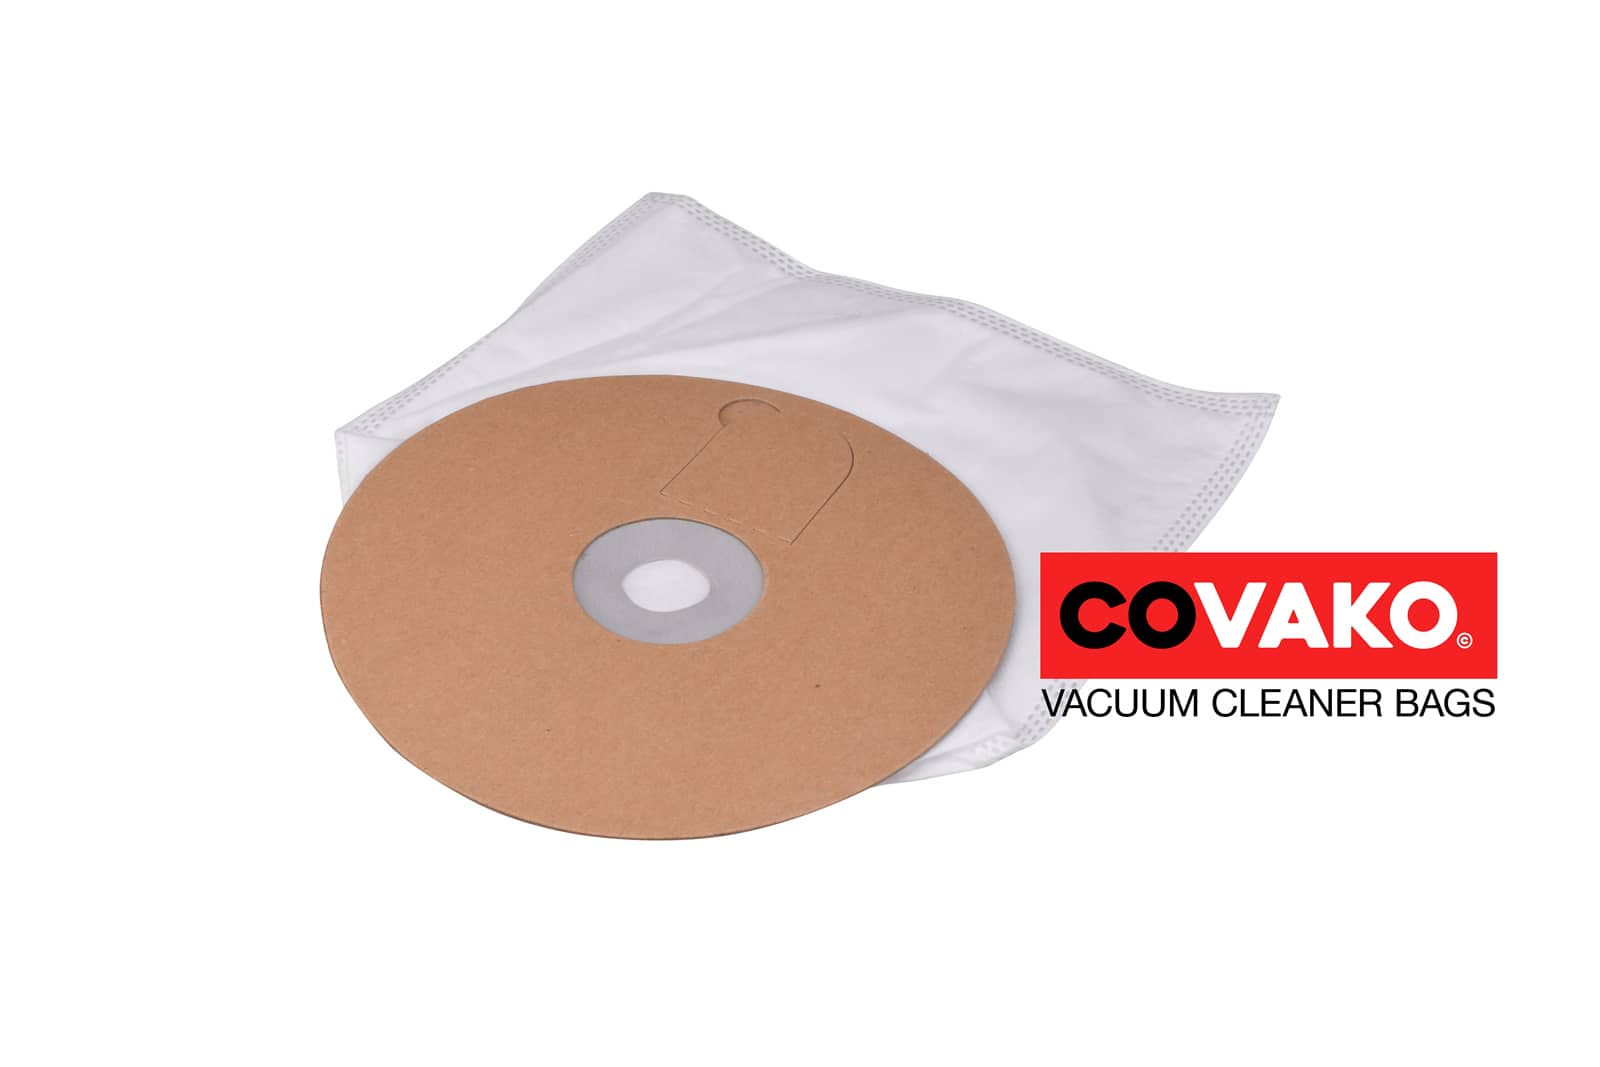 I-vac W 1 / Synthesis - I-vac vacuum cleaner bags